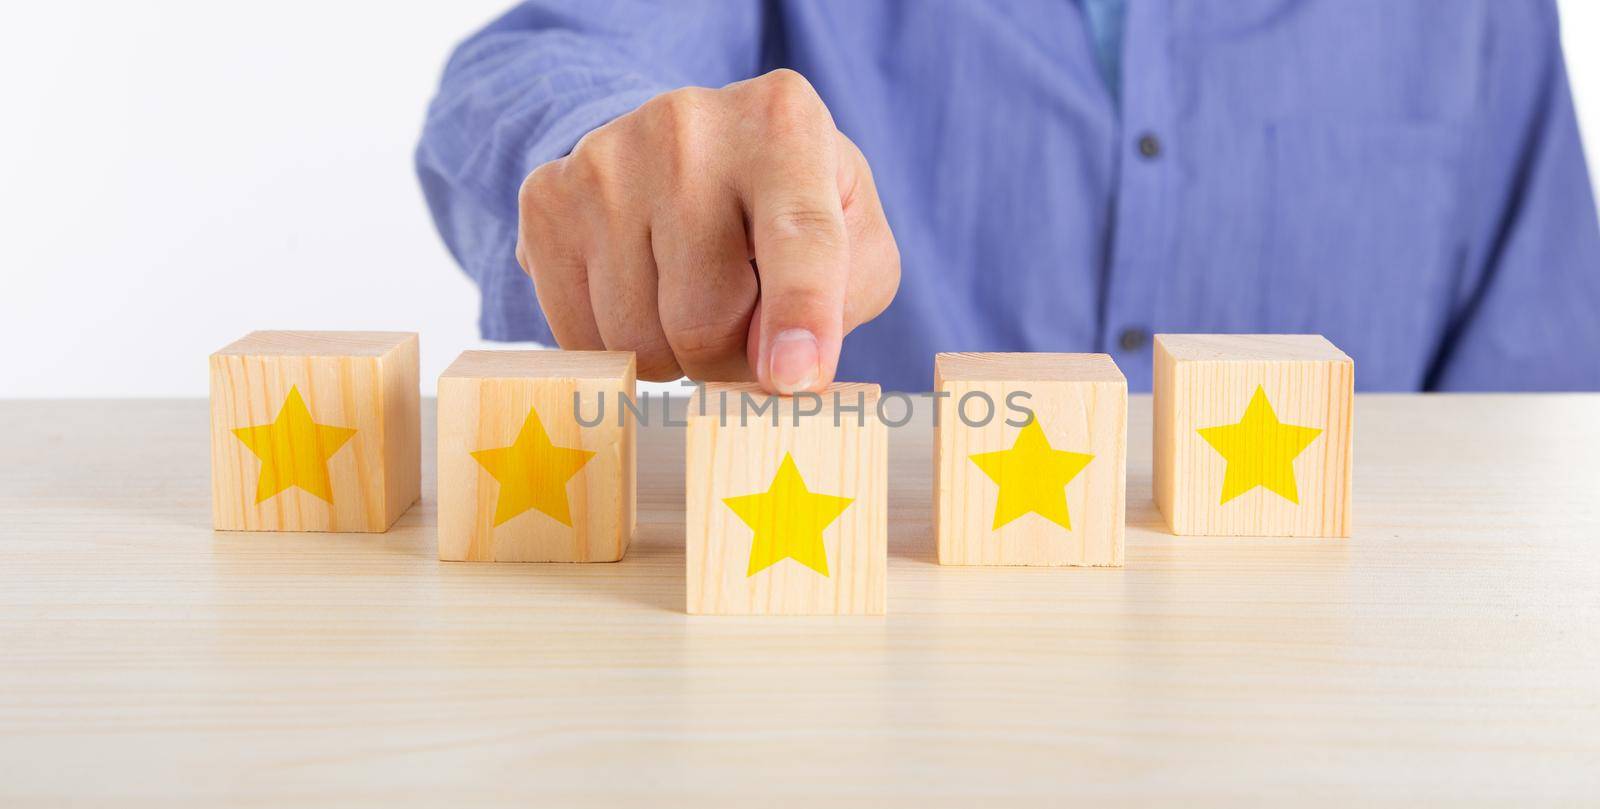 The best excellent business services rating customer experience concept. Hand touching wooden cube with five star shape on desk